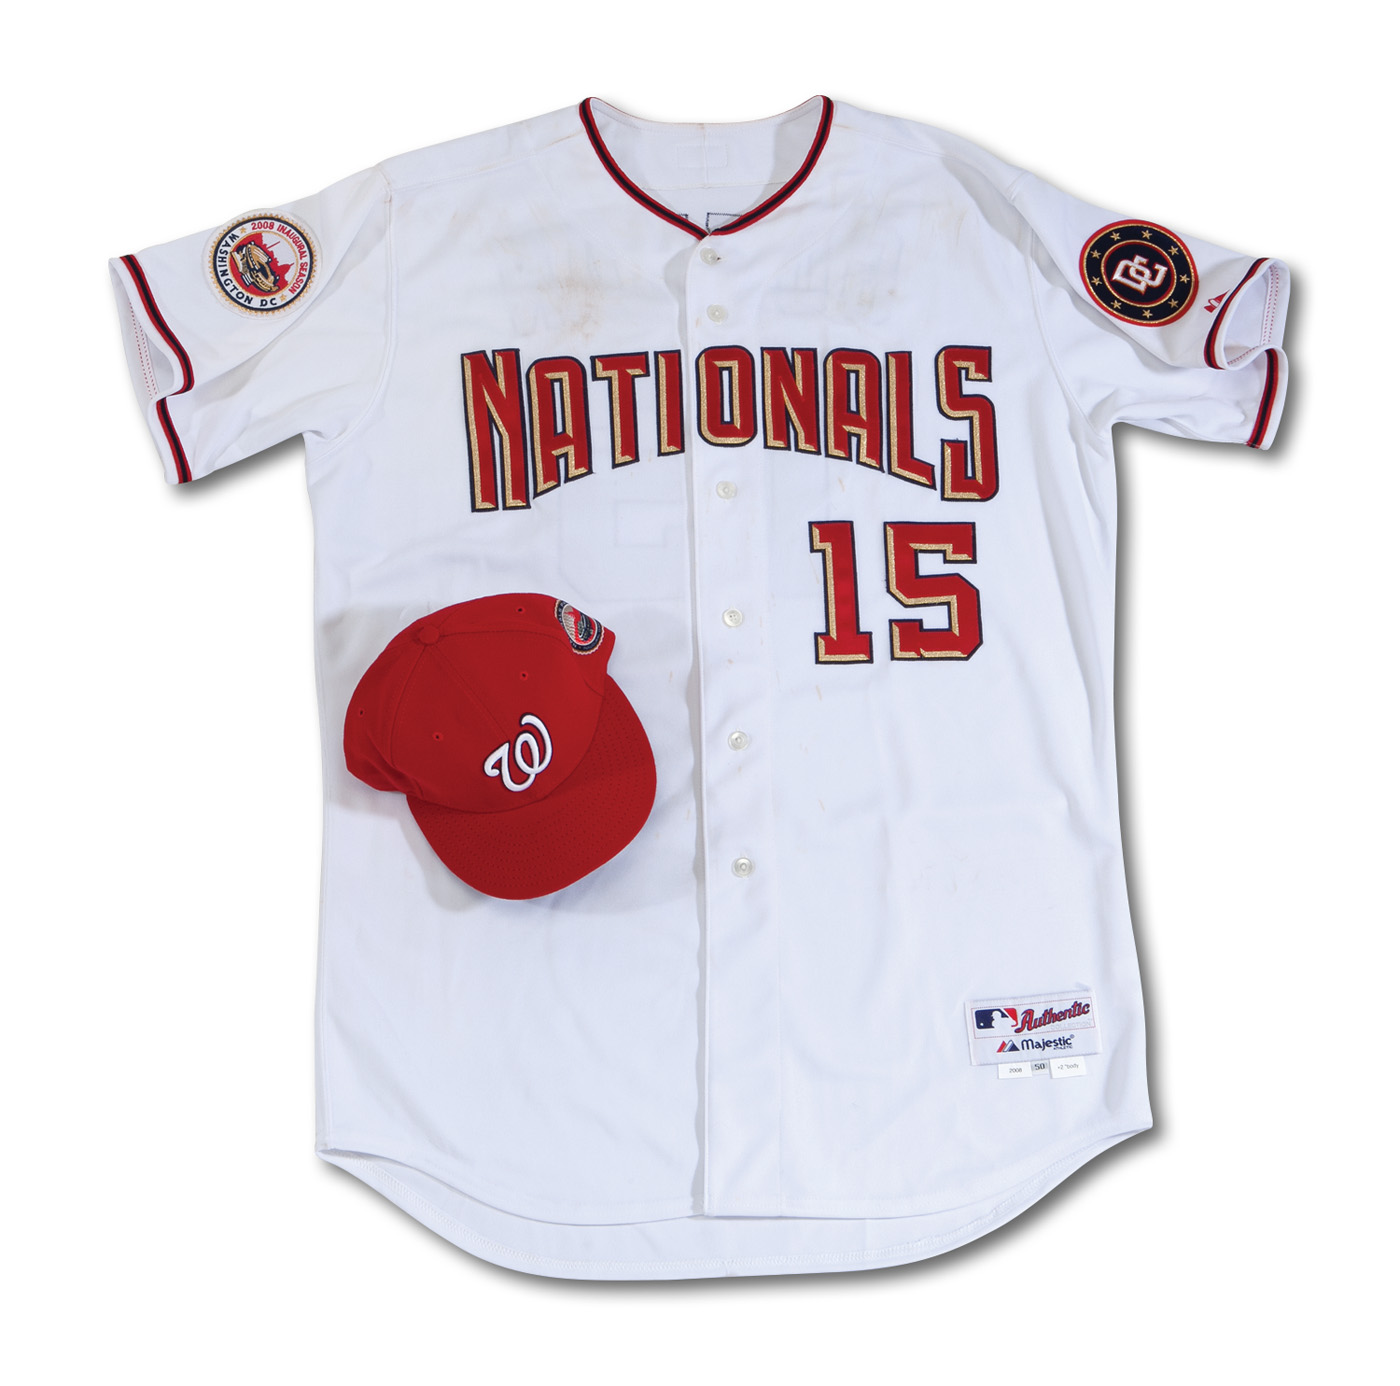 Ryan Zimmerman Autographed White Authentic Nationals Jersey